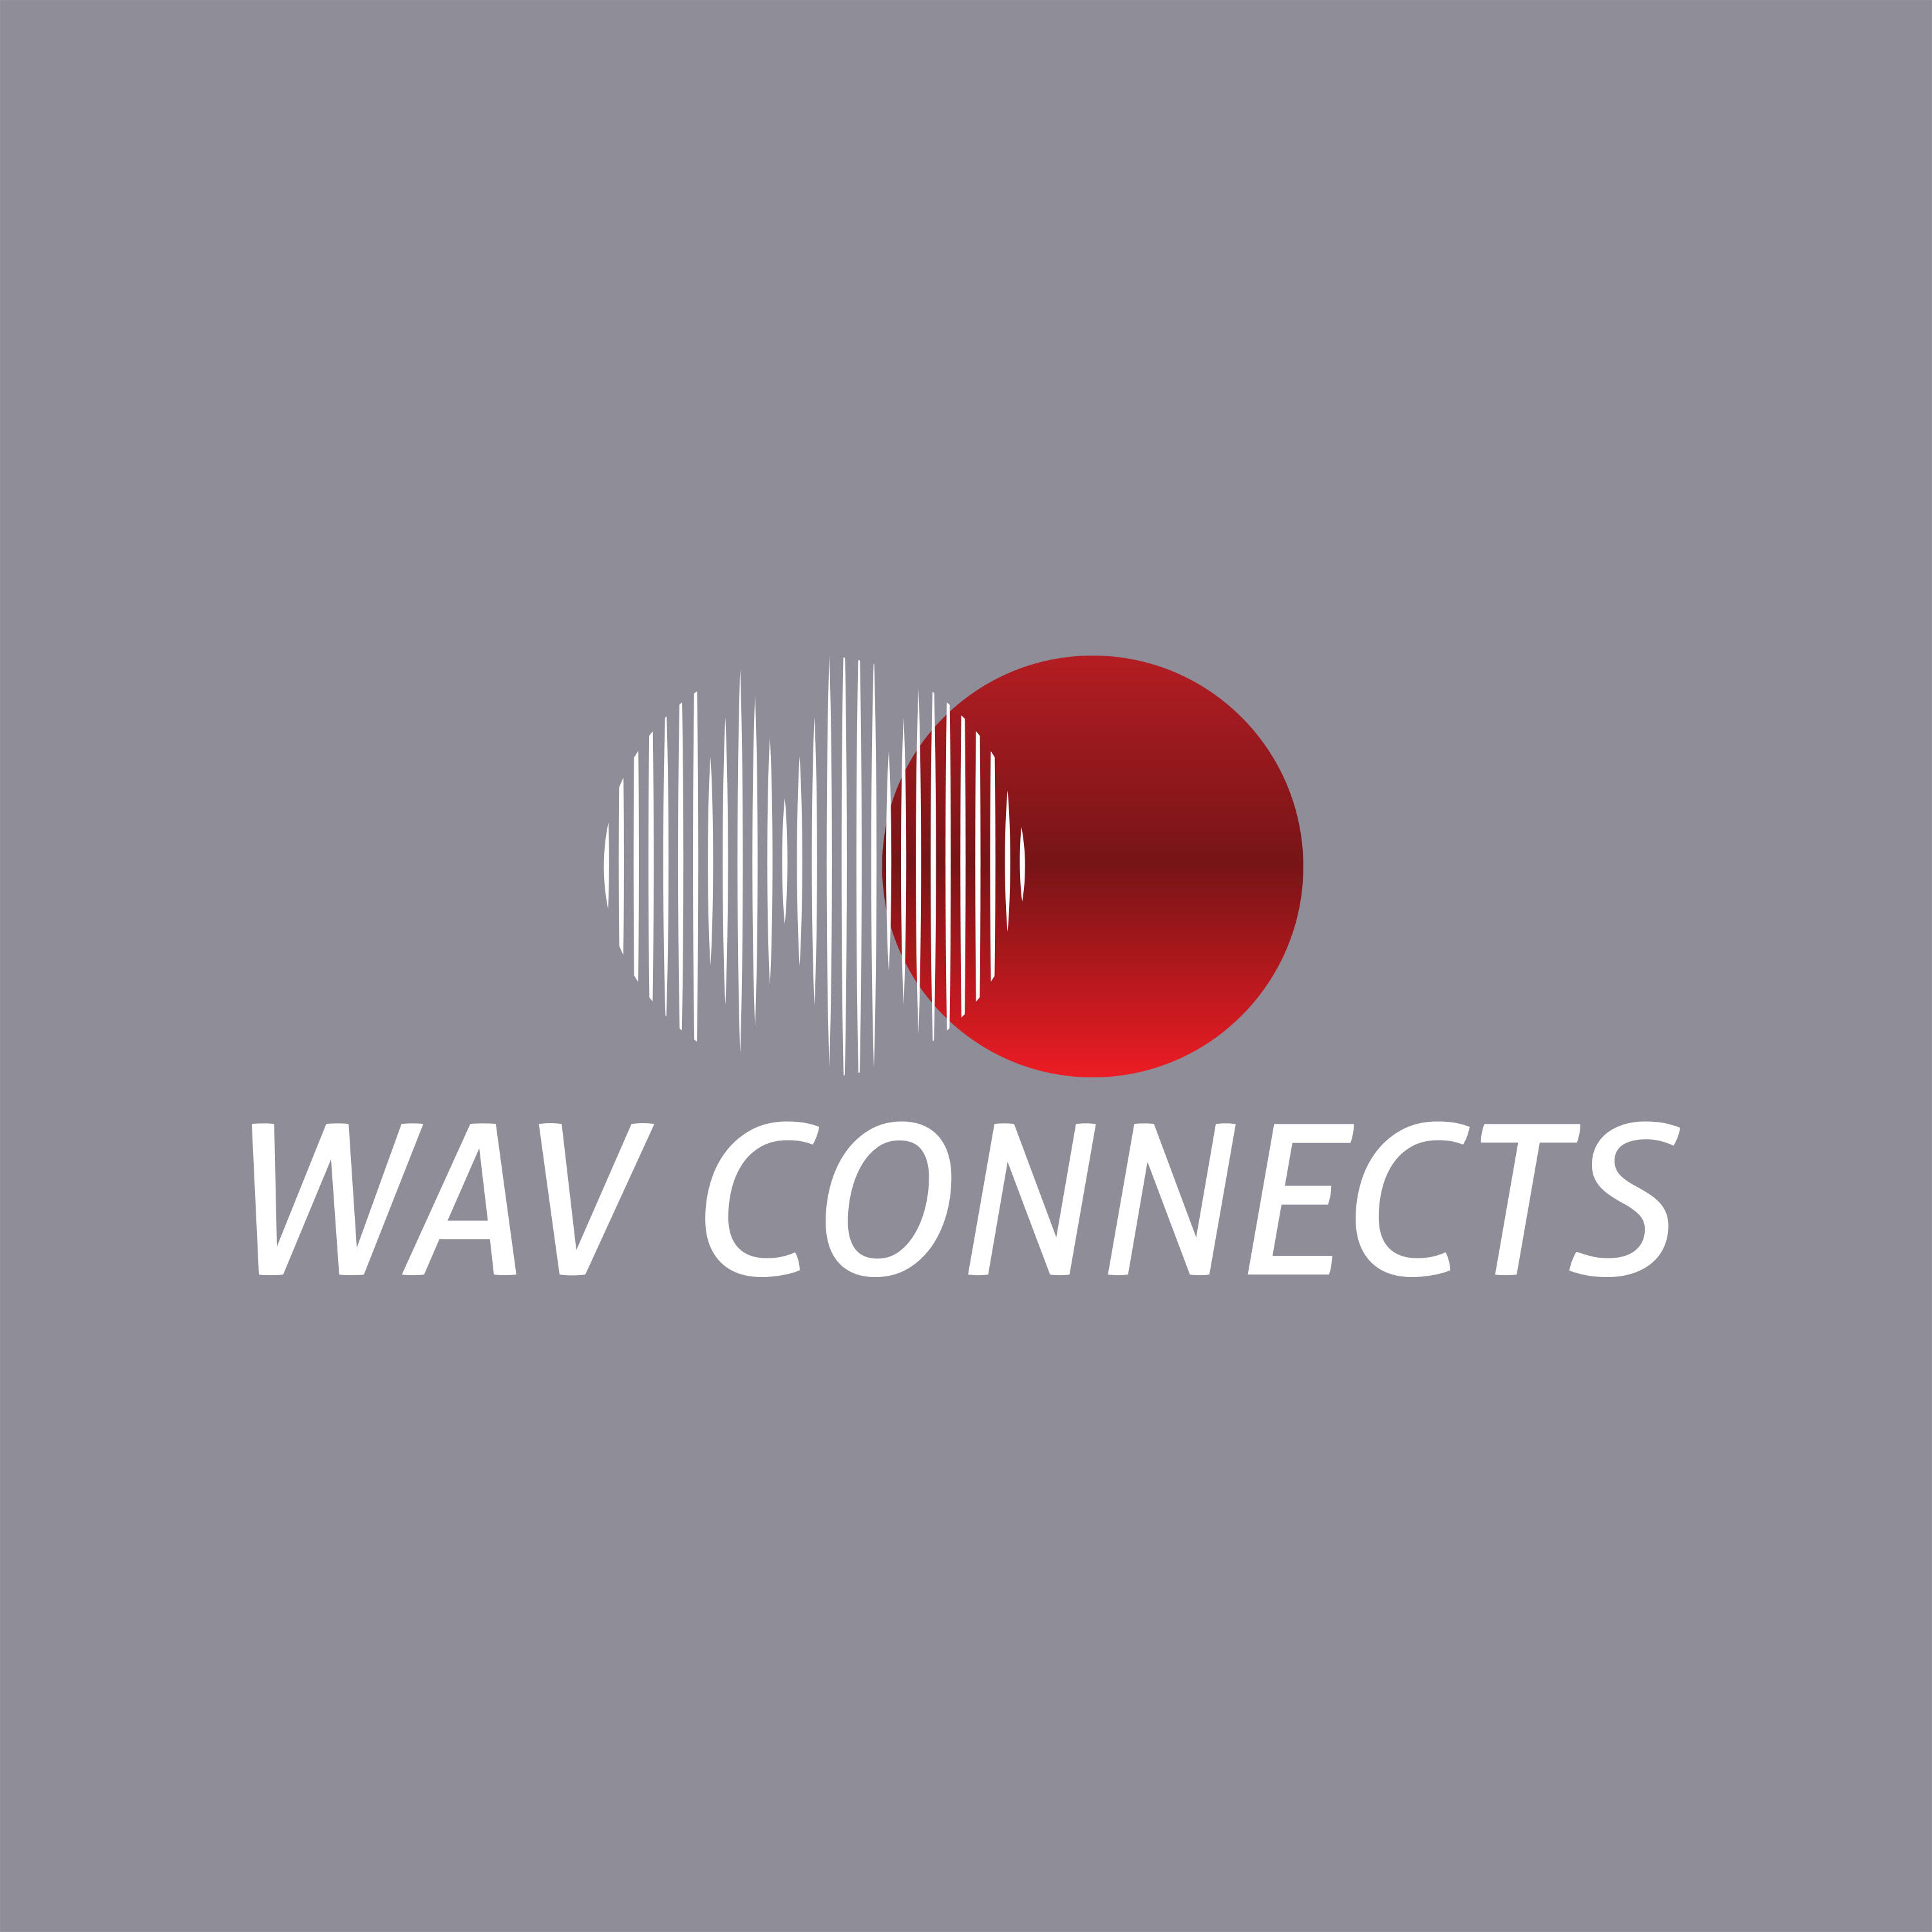 WAV Connects